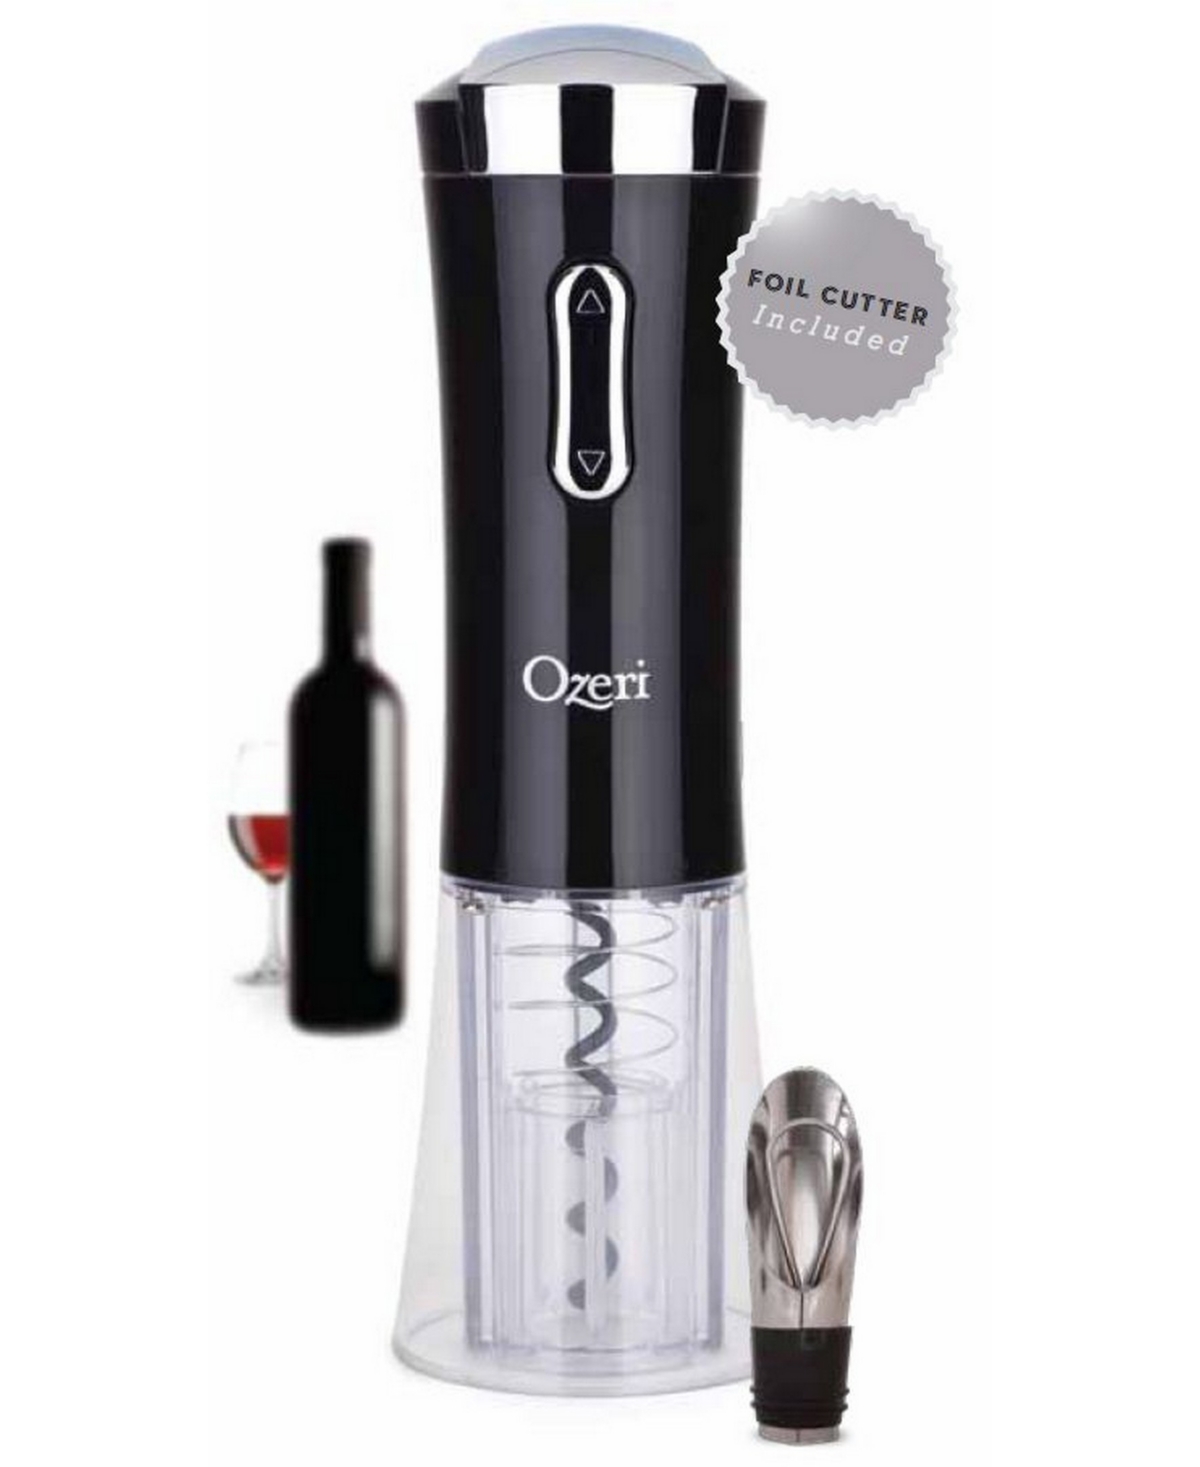 UPC 815817010001 product image for Nouveaux Ii Electric Wine Opener with Foil Cutter, Wine Pourer and Stopper | upcitemdb.com